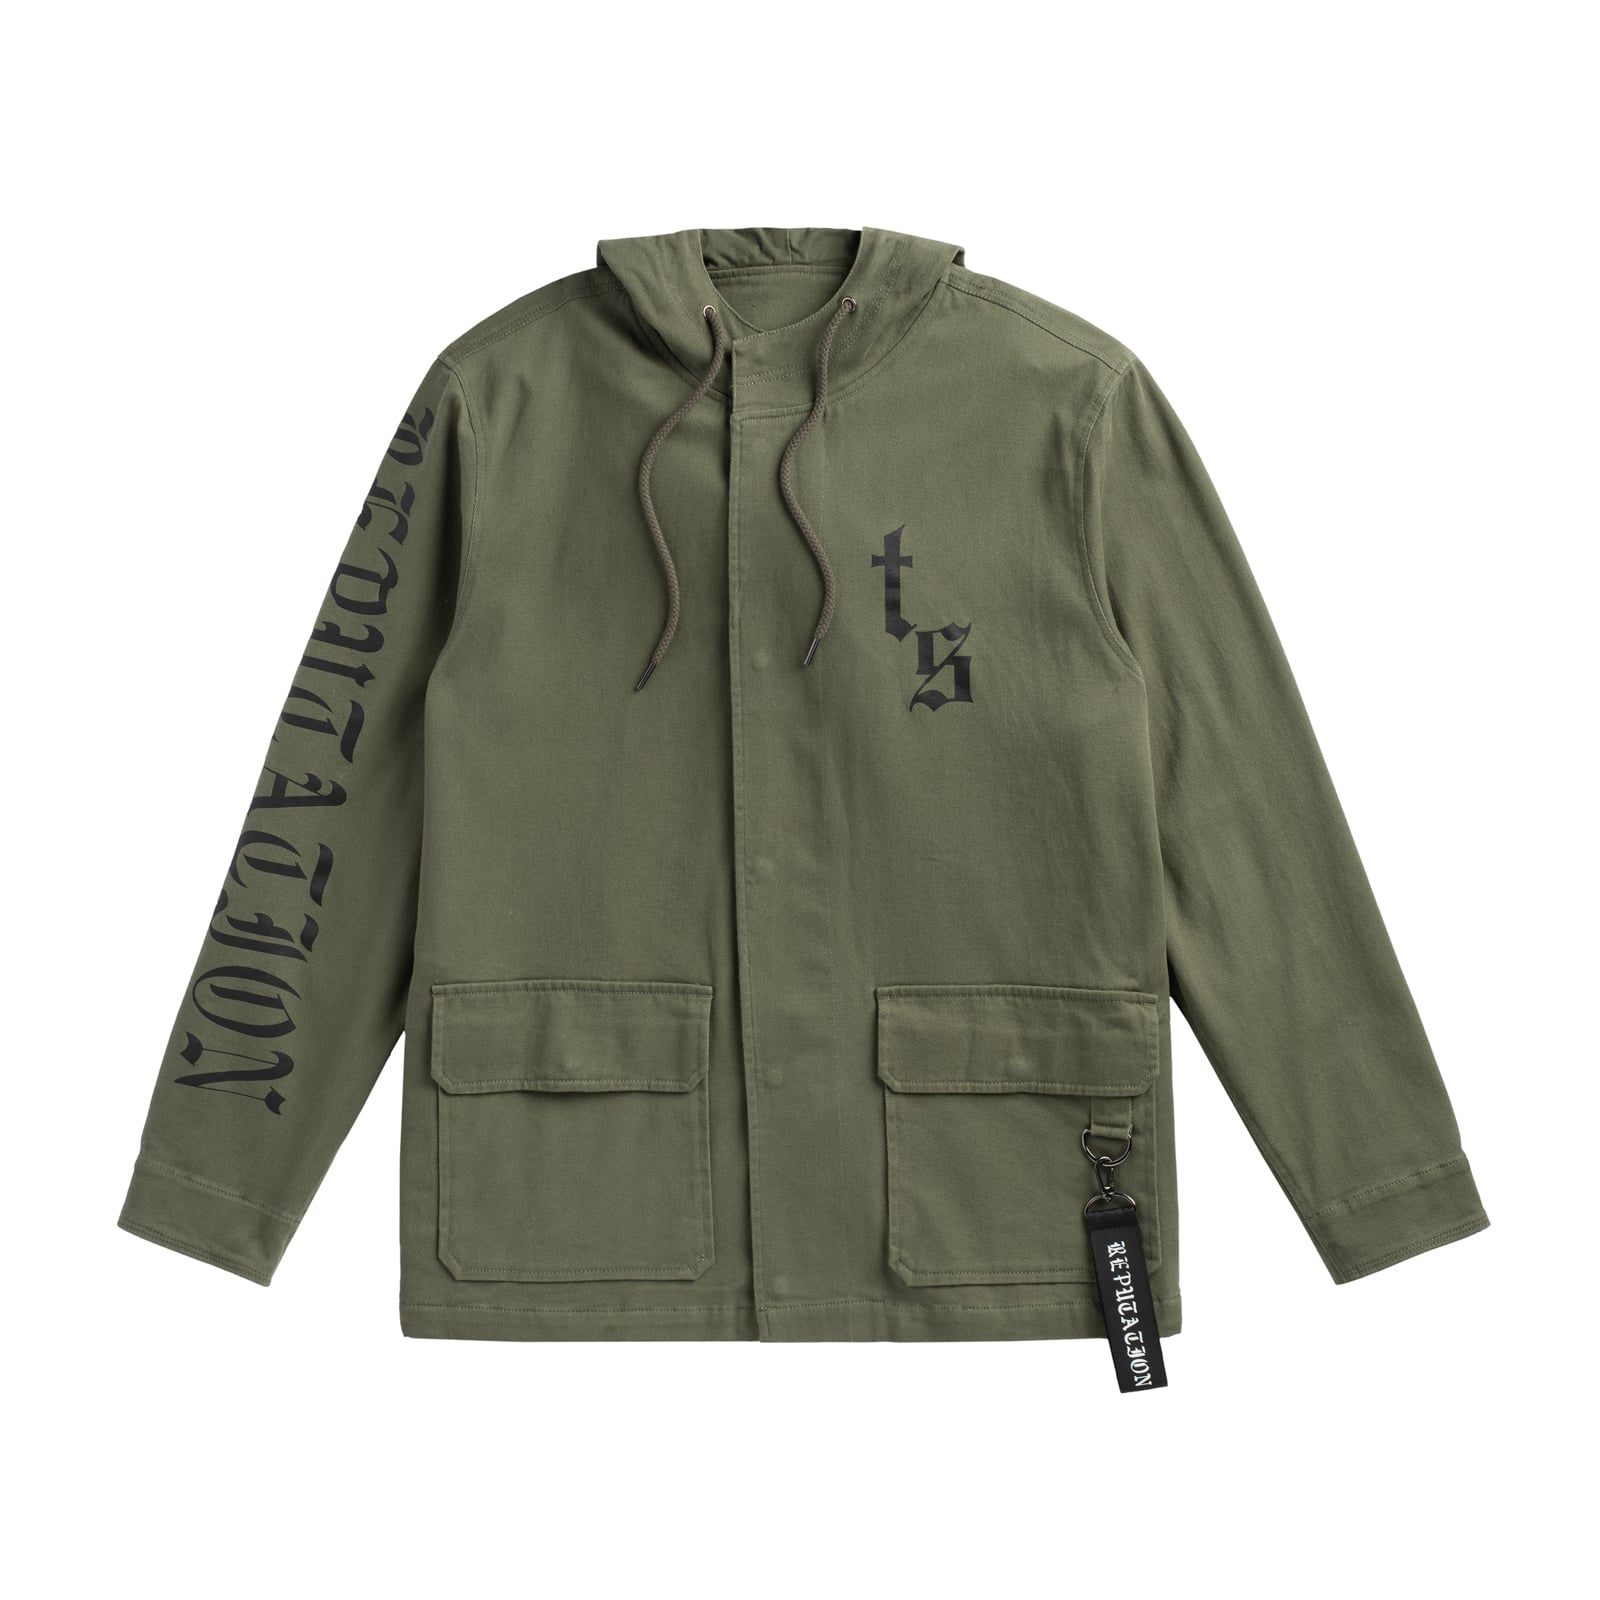 Olive Tour Jacket With Snake Design 75 Taylor Swift Gifts